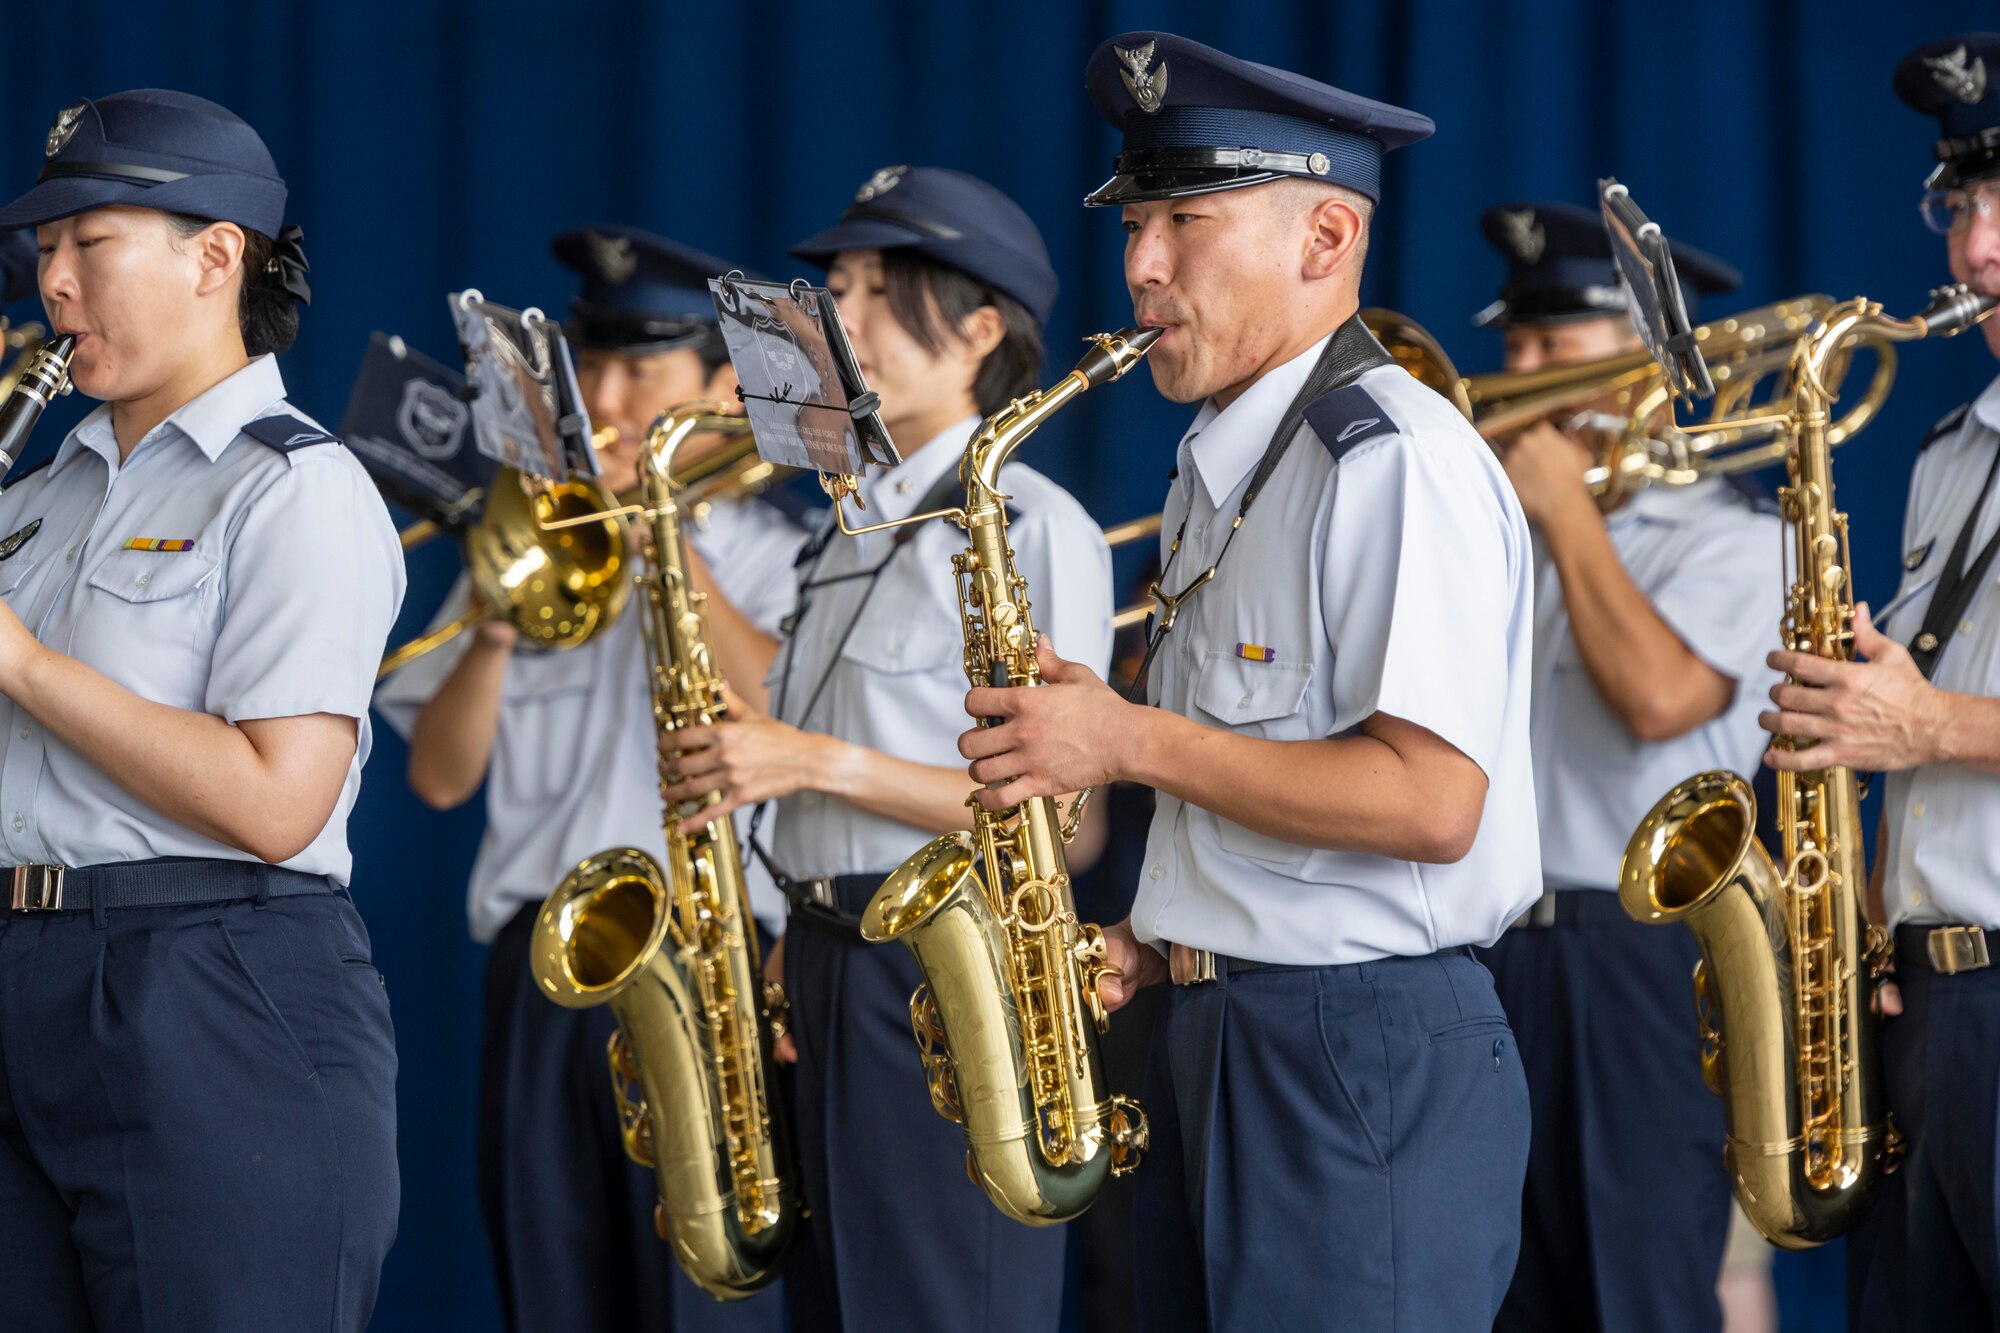 A group of Japanese military members play instruments.